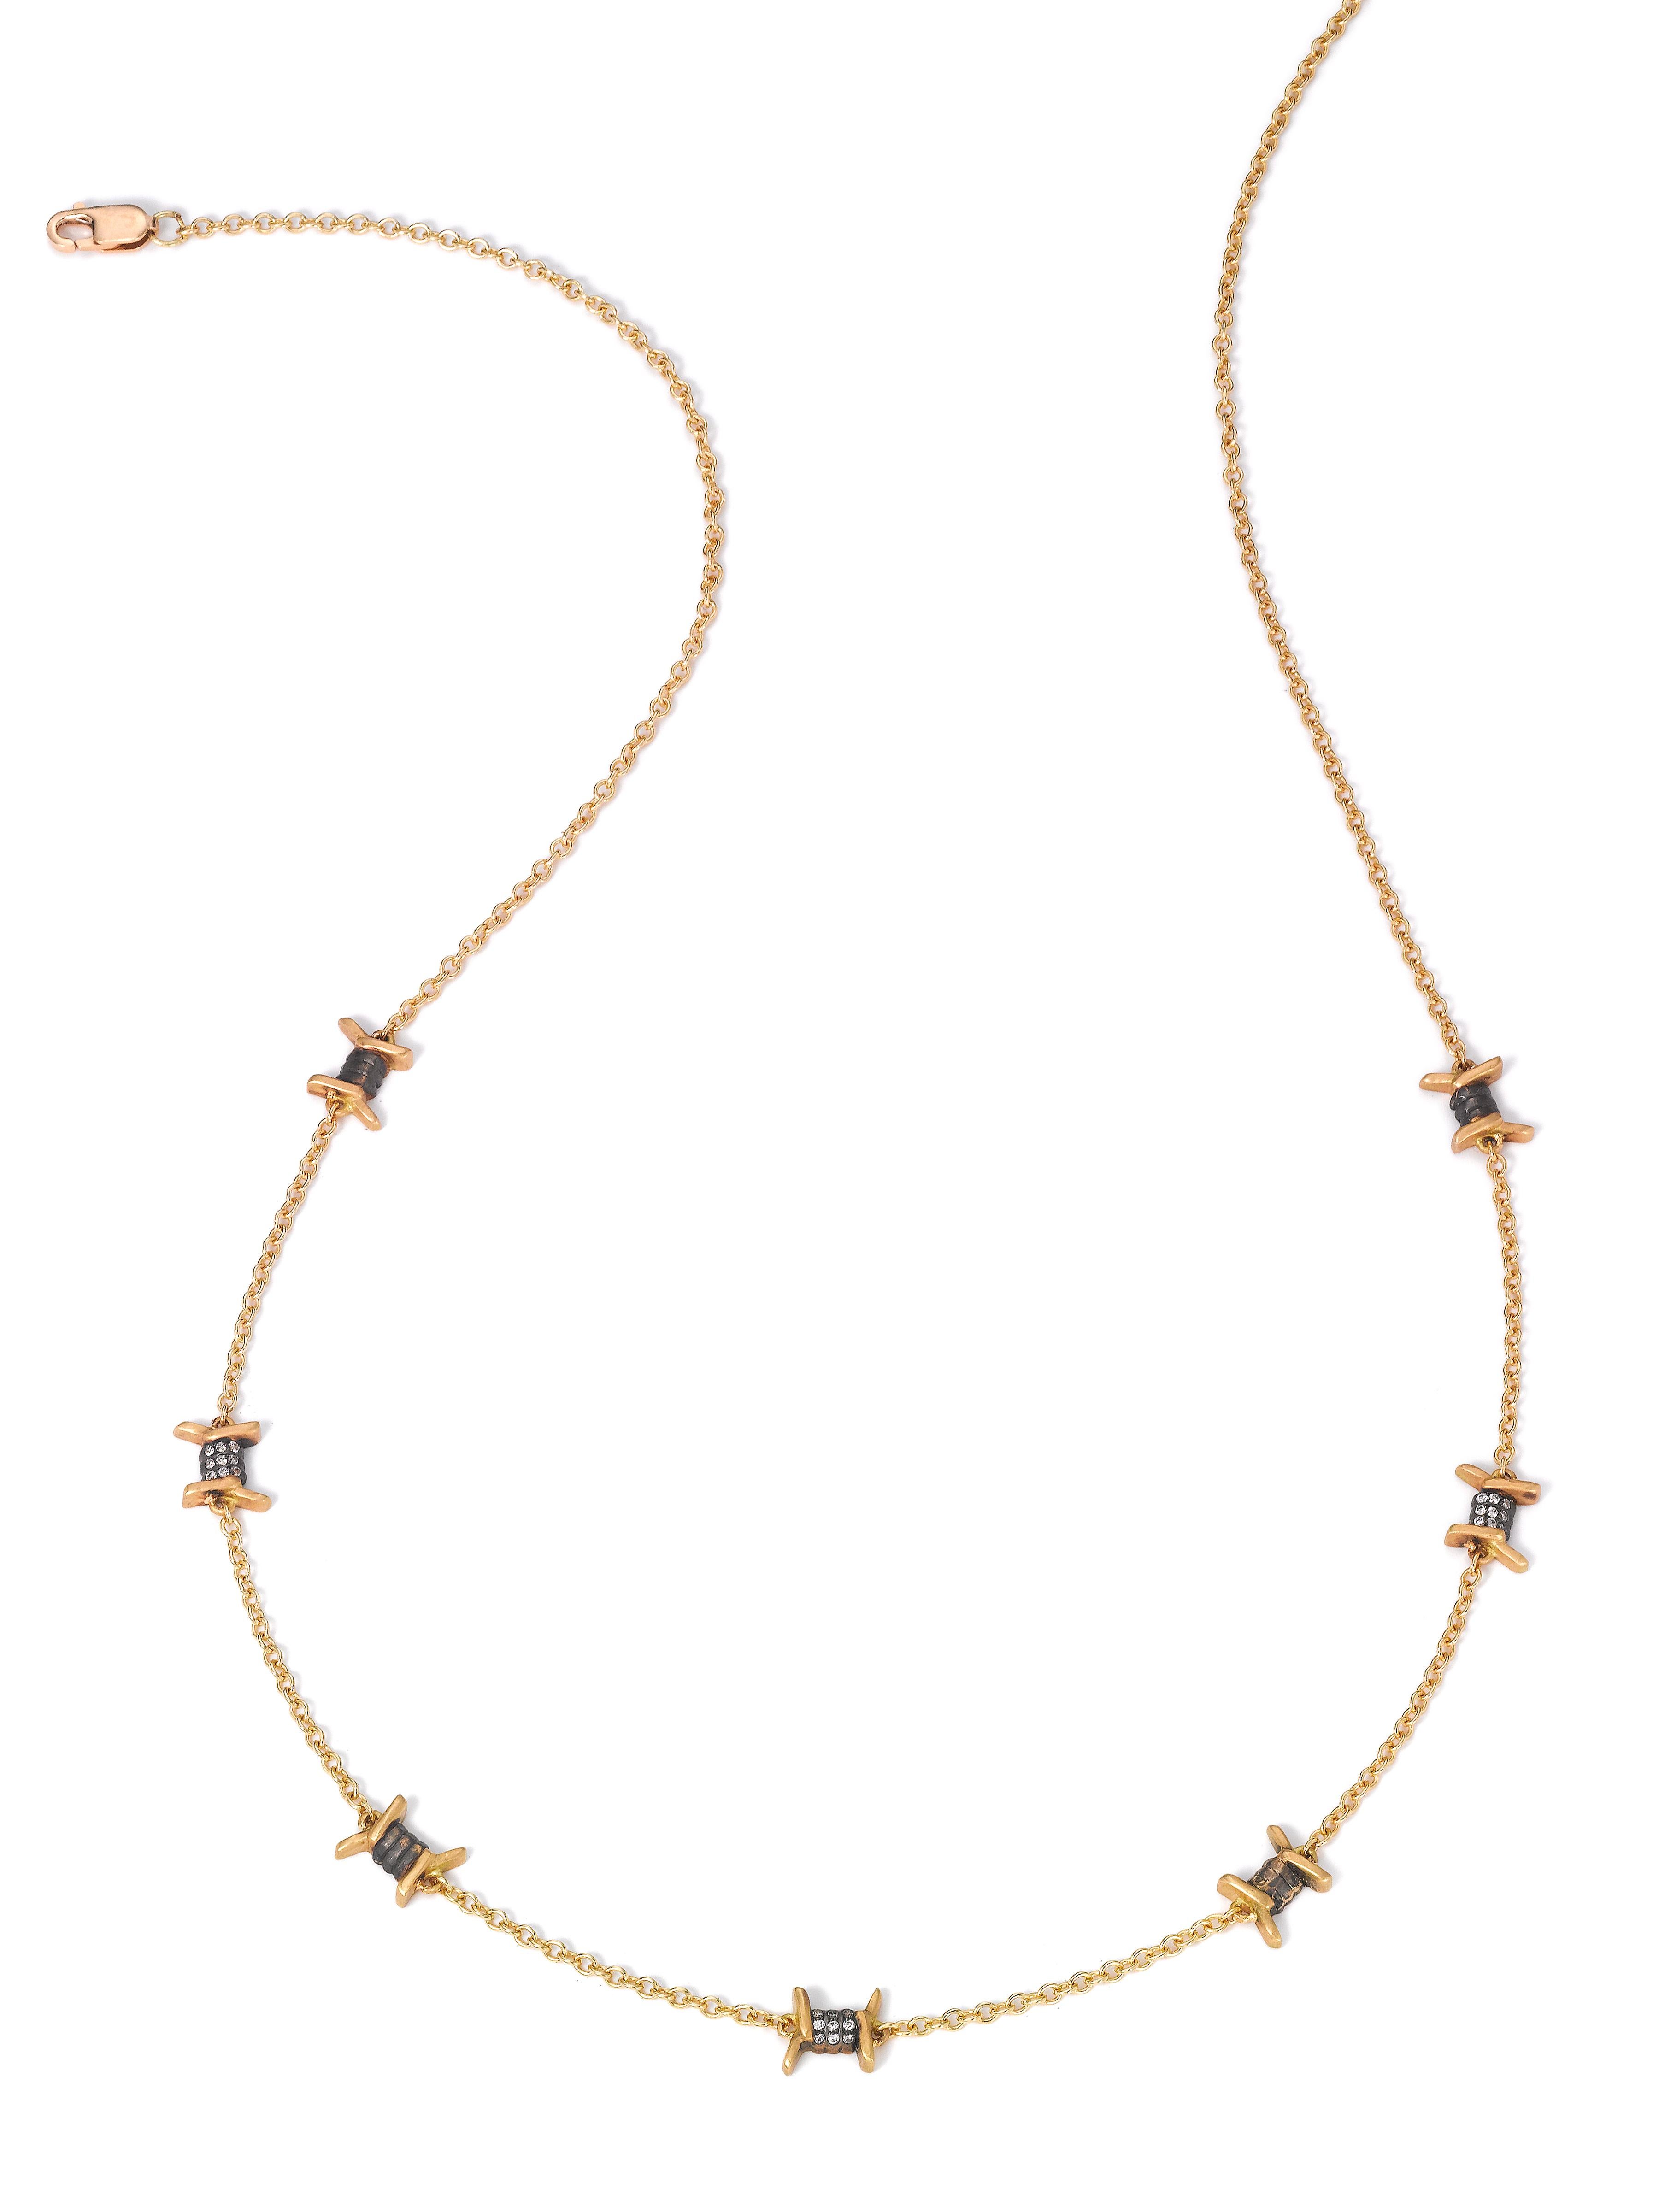 An easy necklace for everyday wear, but with a touch of punk.

18K yellow gold, satin finish.
27 diamond rounds totaling 0.09 carats (E/F, VS1/VS2).
16